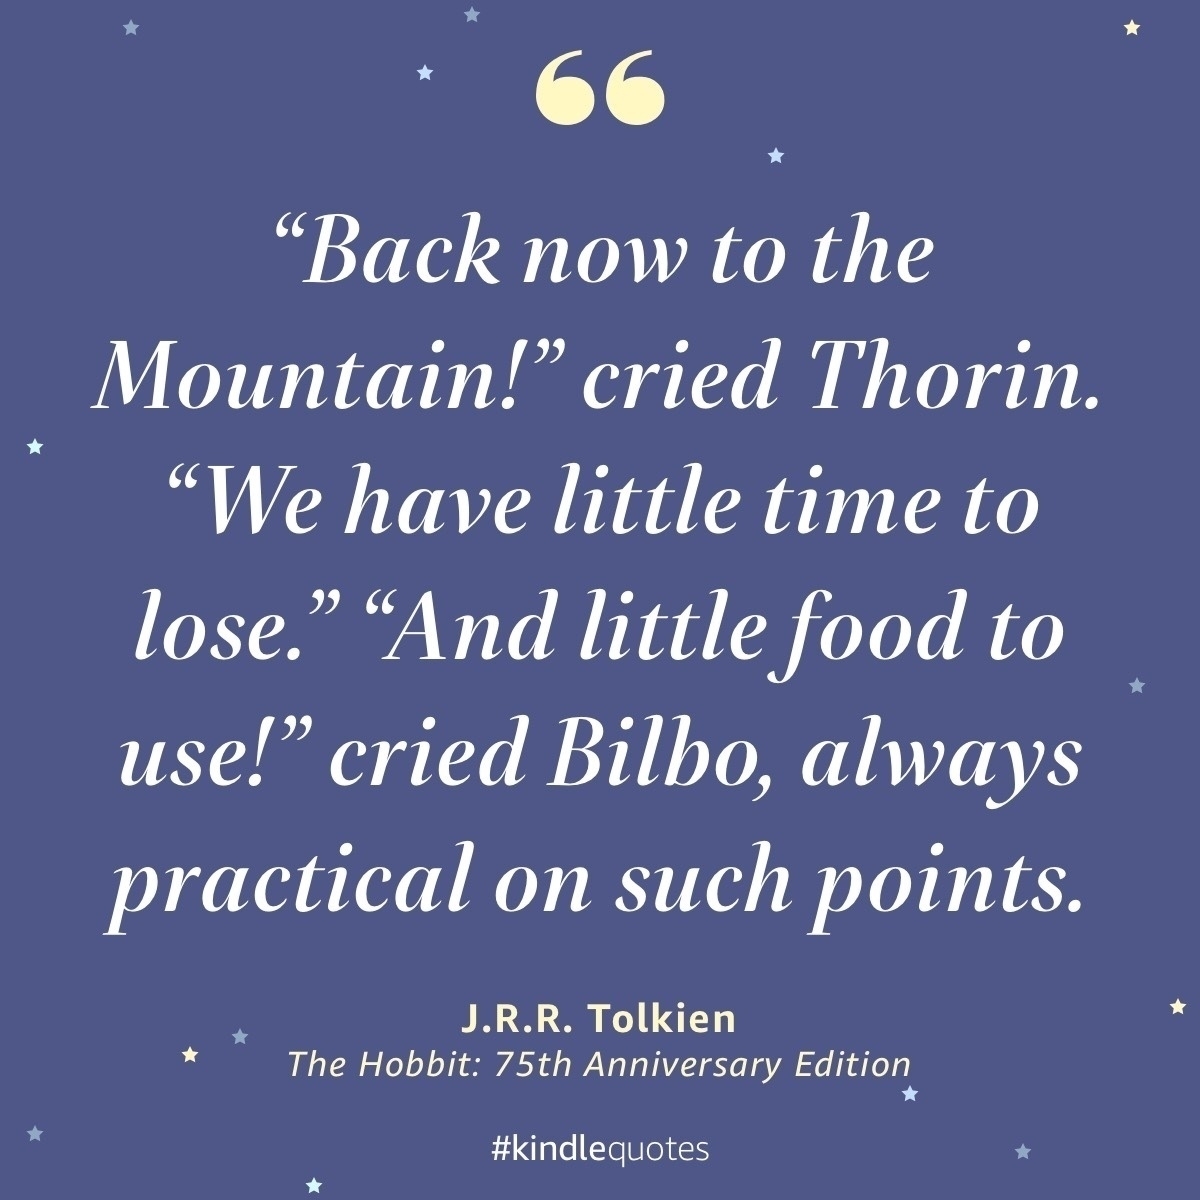 A quote image from chapter 15 of The Hobbit: Back now to the Mountain! cried Thorin. We have little time to lose. And little food to use! cried Bilbo, always practical on such points.